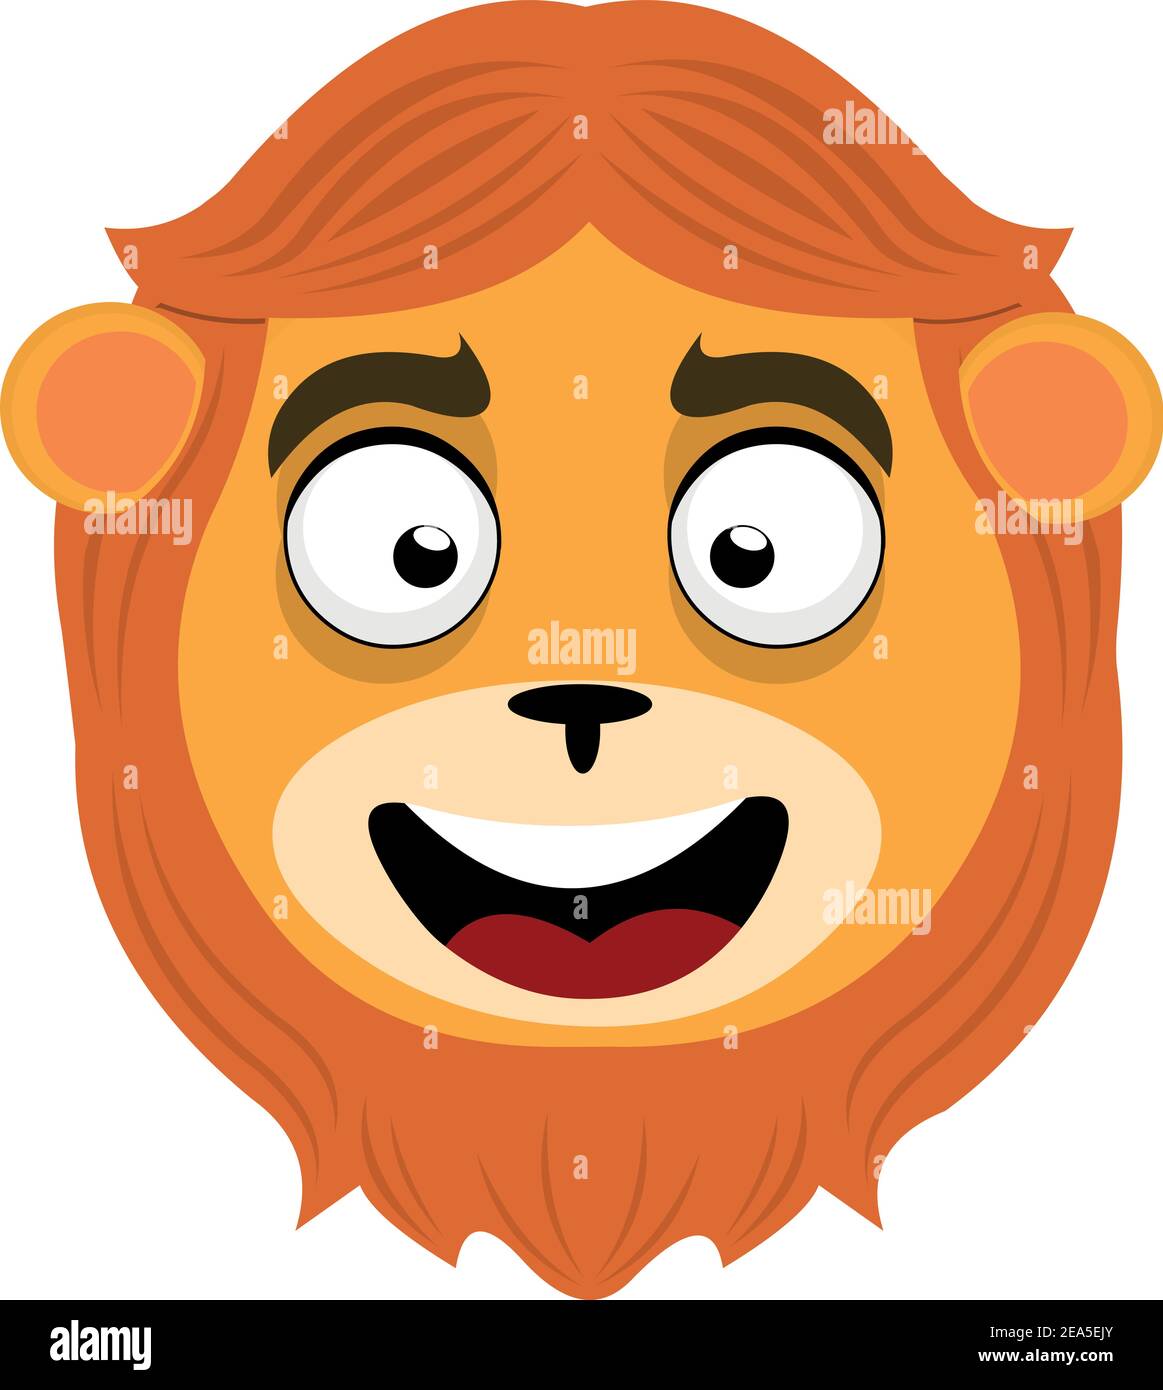 Vector illustration of emoticon of the face of a cartoon lion Stock Vector